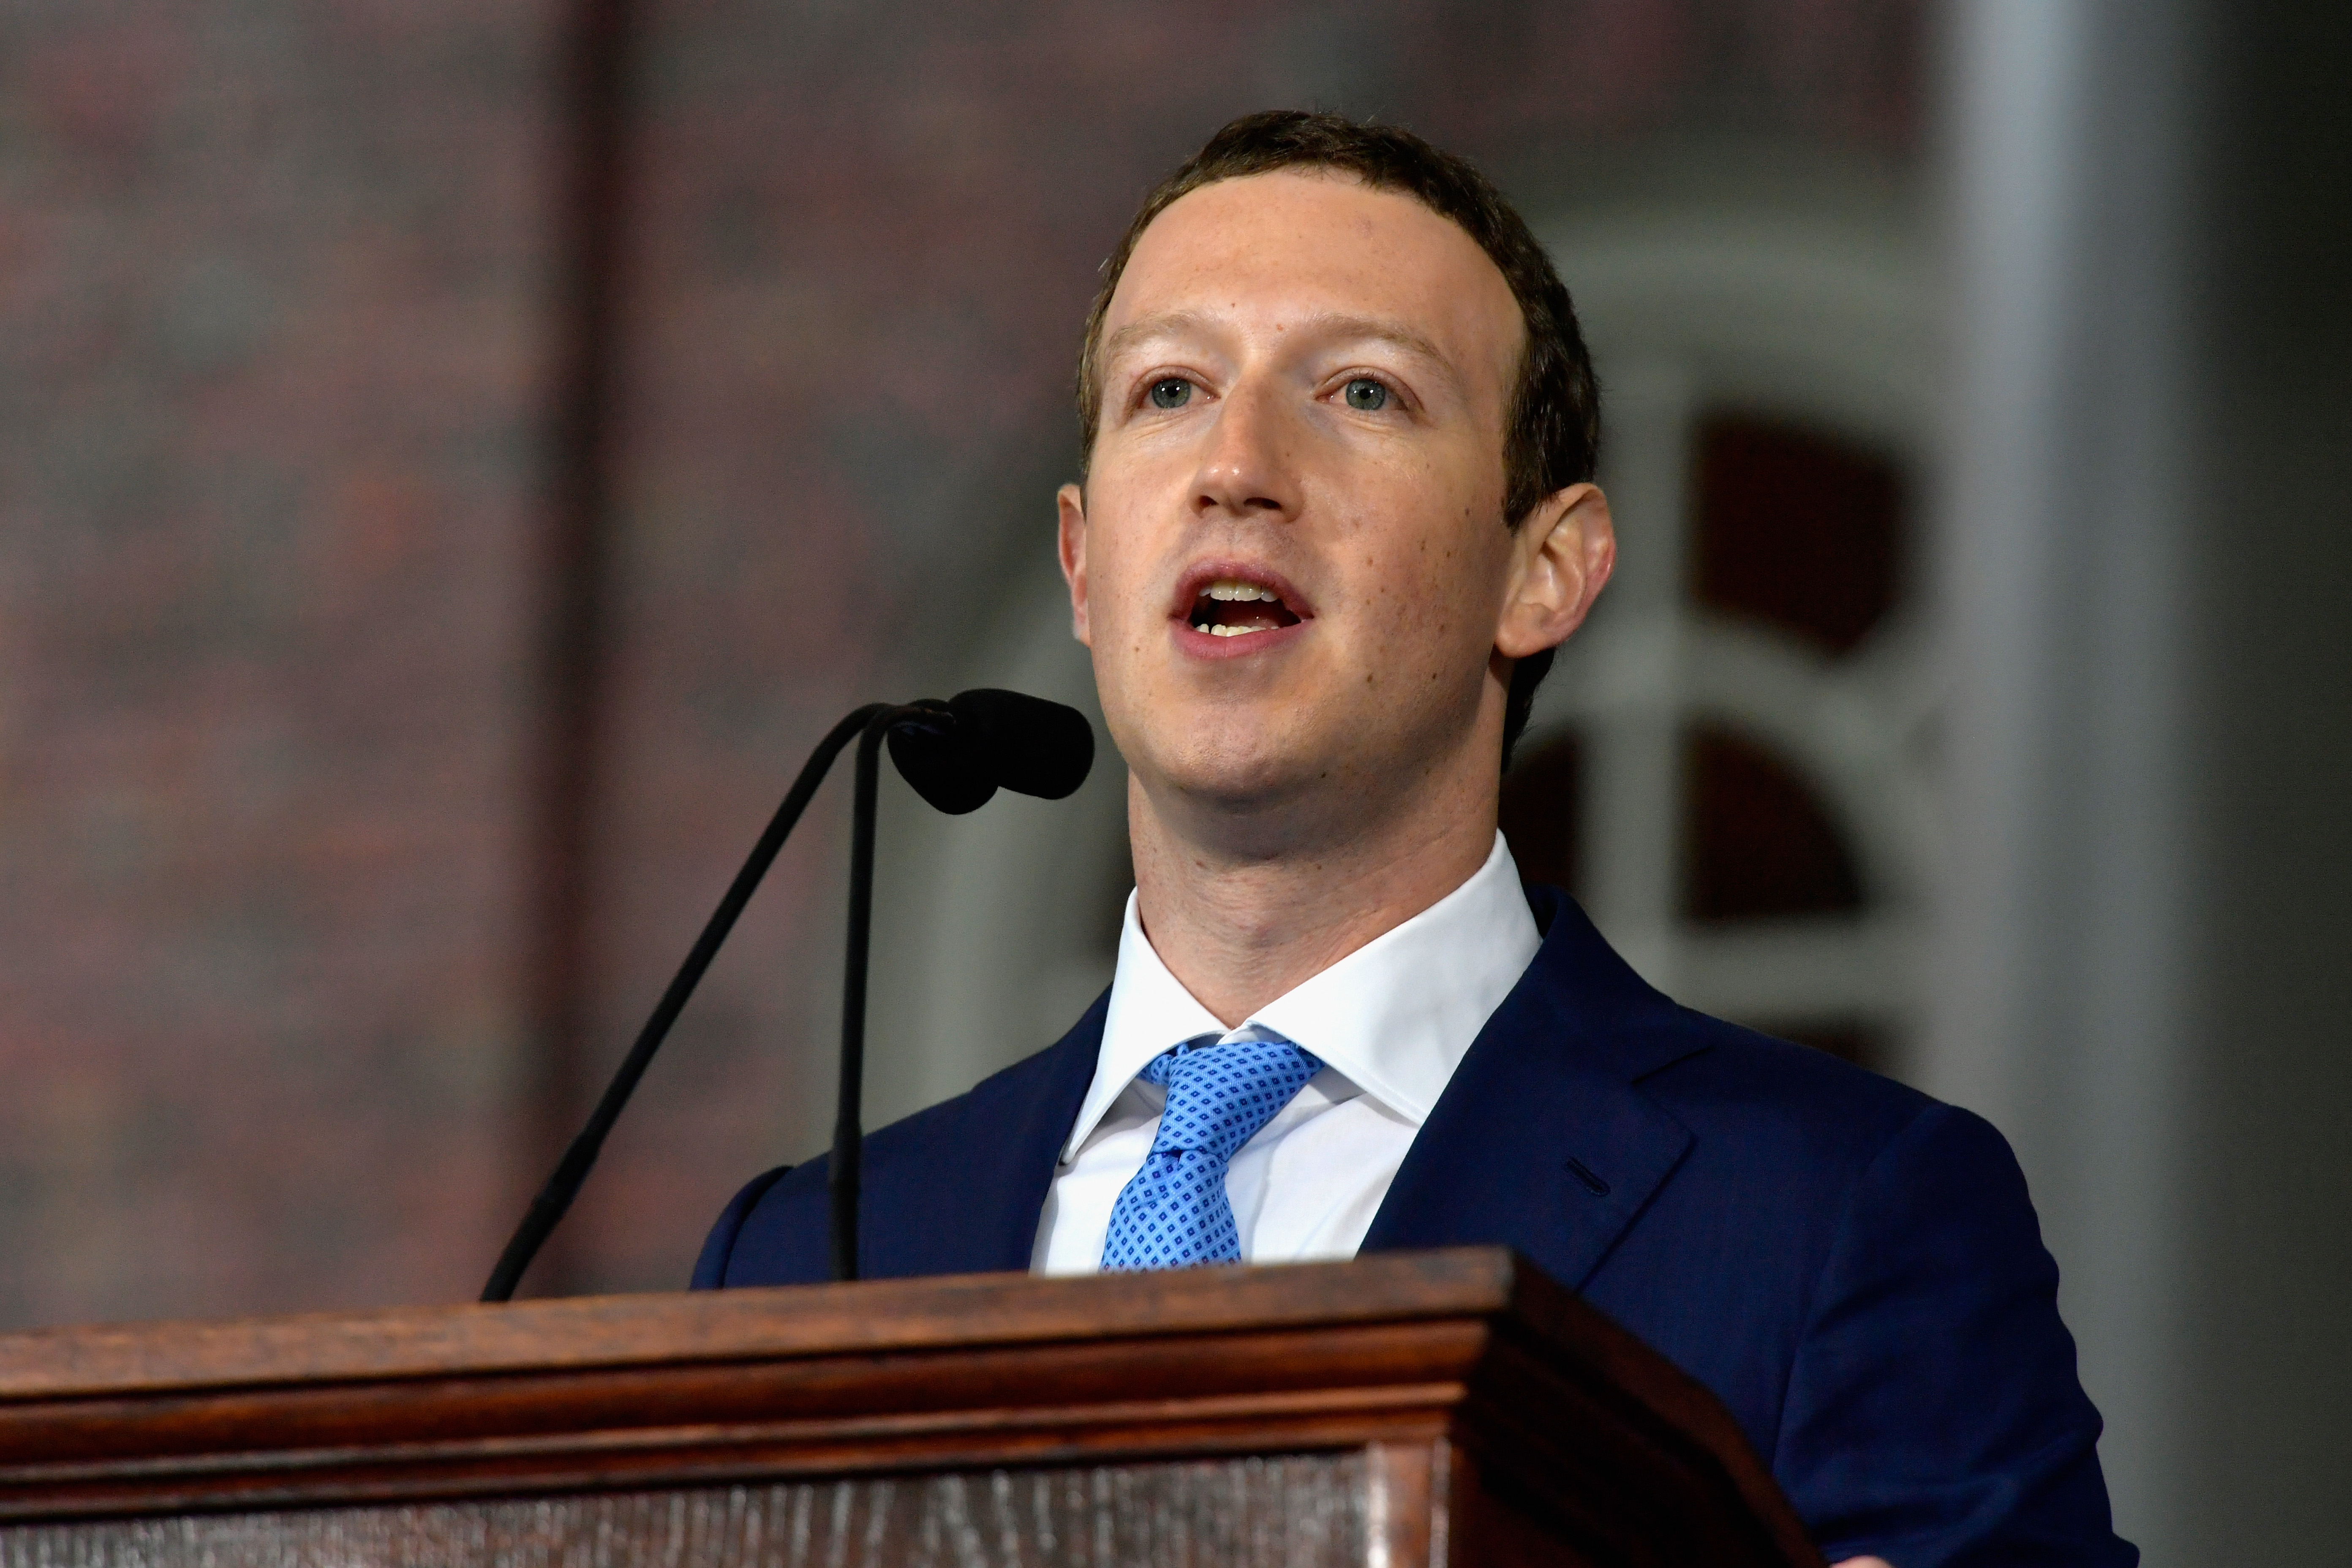 Mark Zuckerberg delivers the commencement address at Harvard, in 2017.